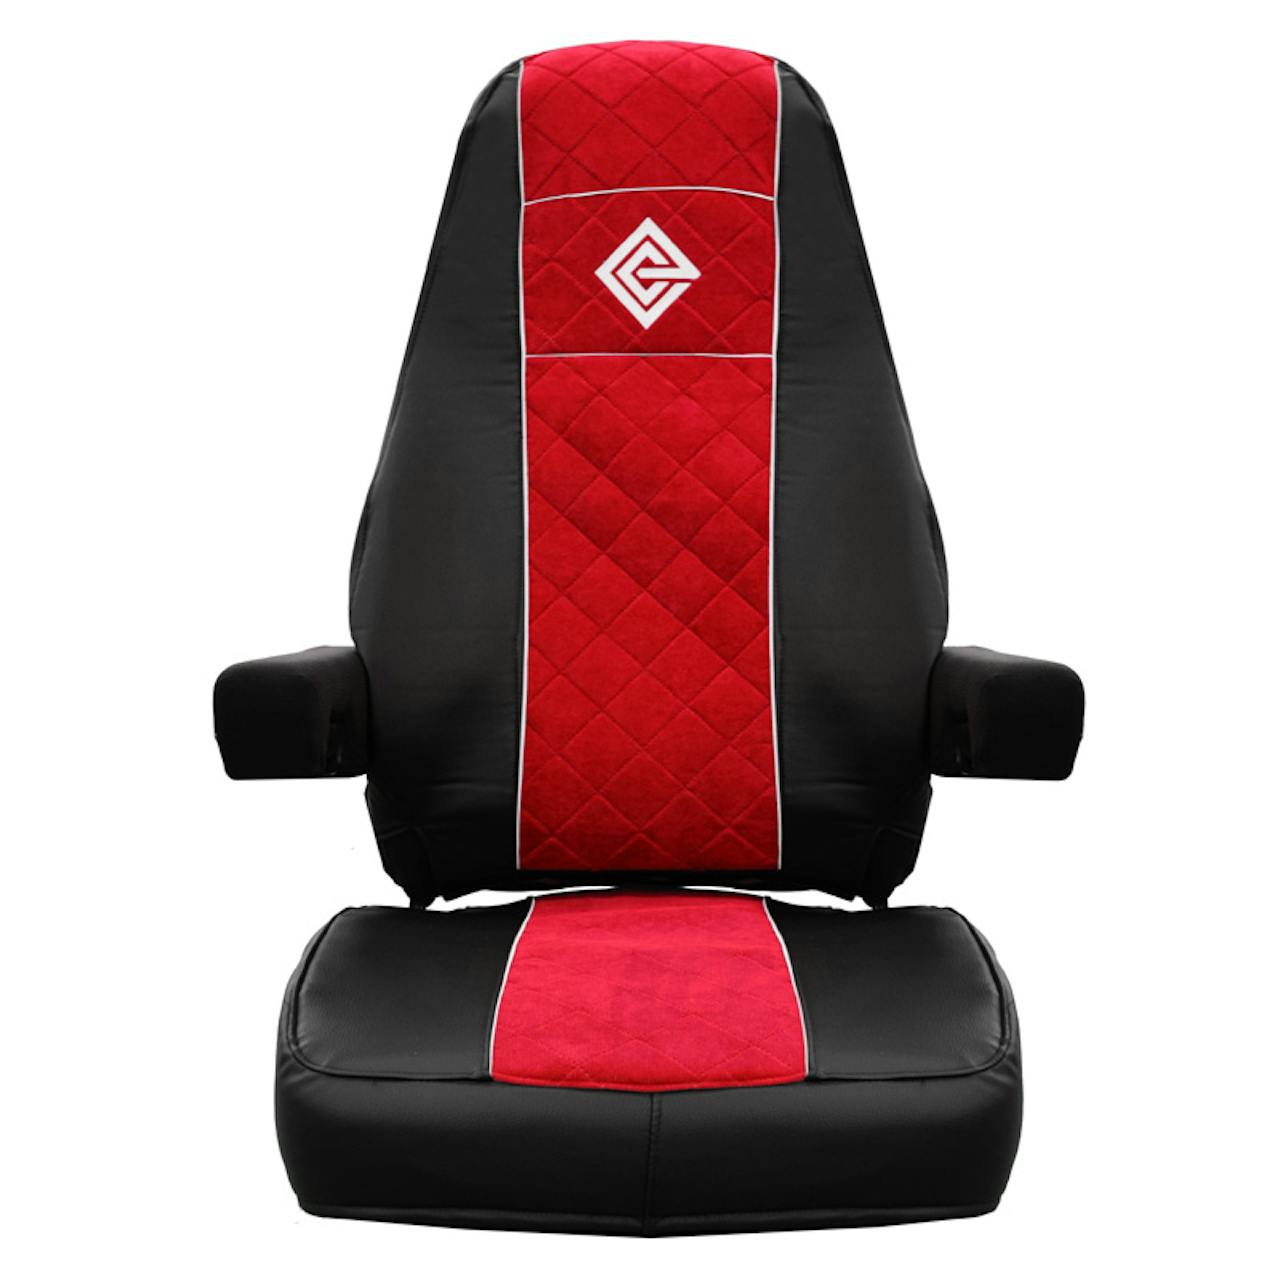 https://raneys-cdn11.imgix.net/images/stencil/original/products/197039/121473/red-seat-cover__50388.1524183031.jpg?auto=compress,format&w=1280